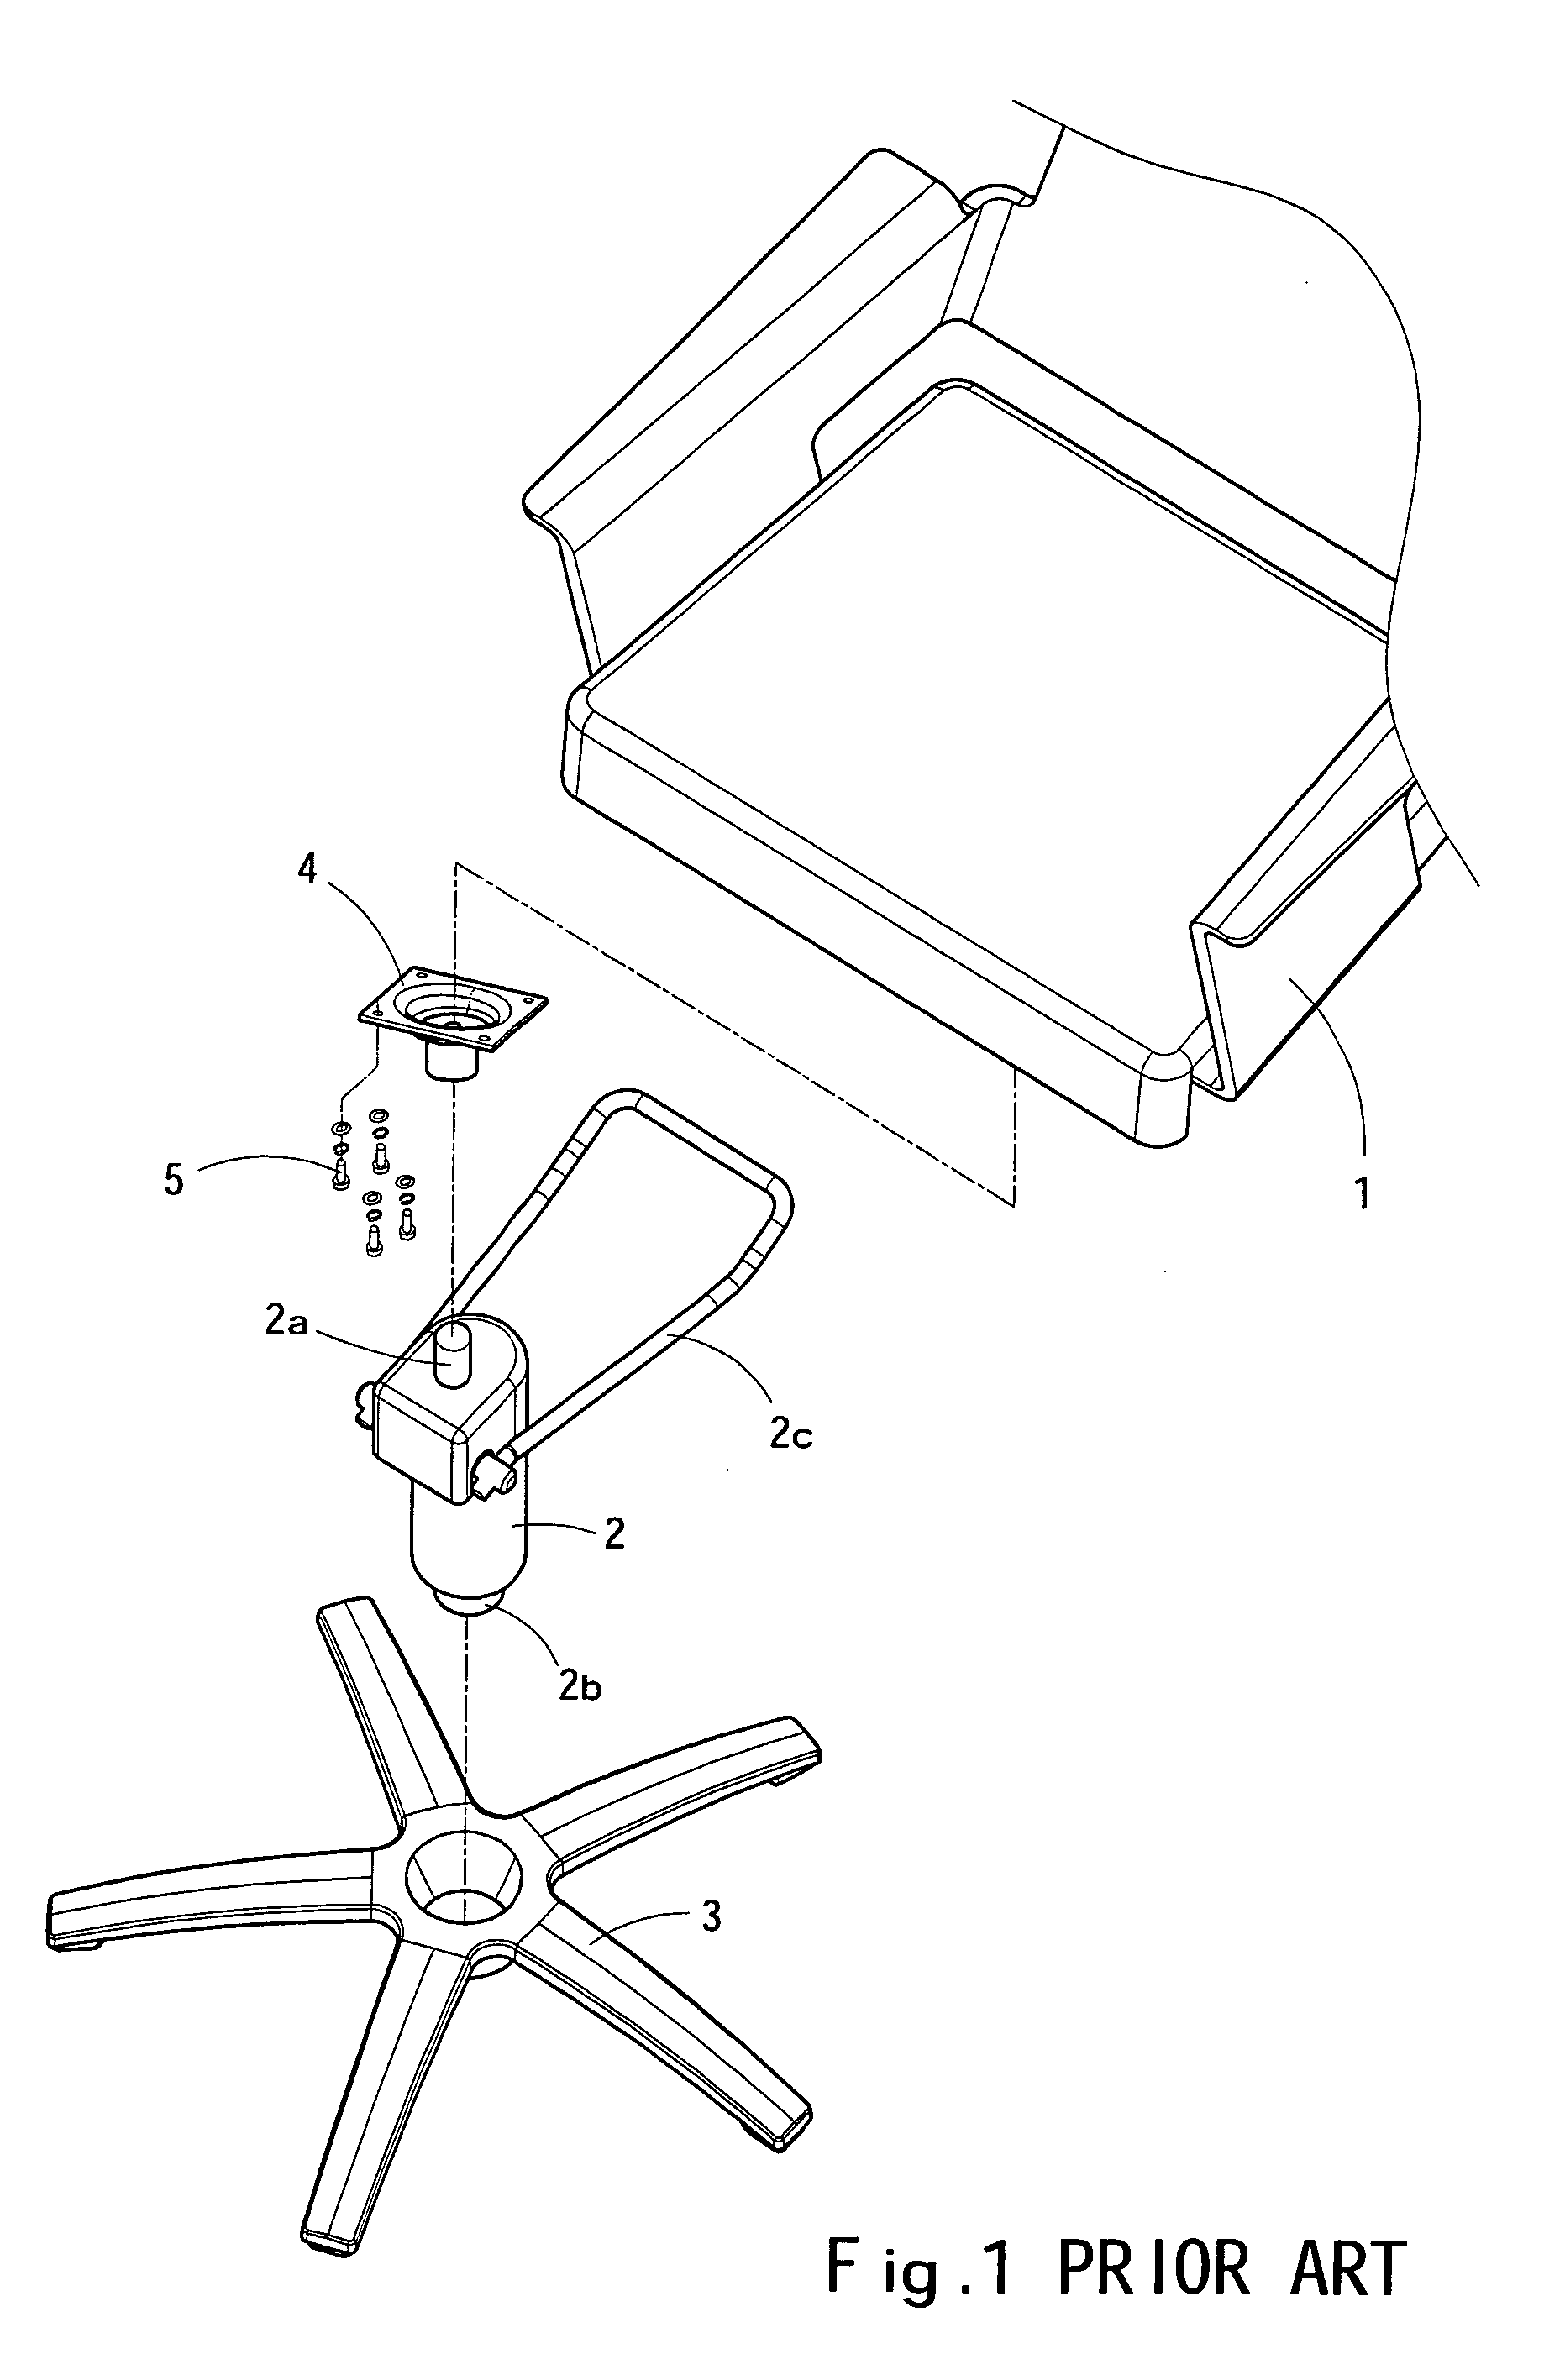 Base coupling structure of a height adjustable chair